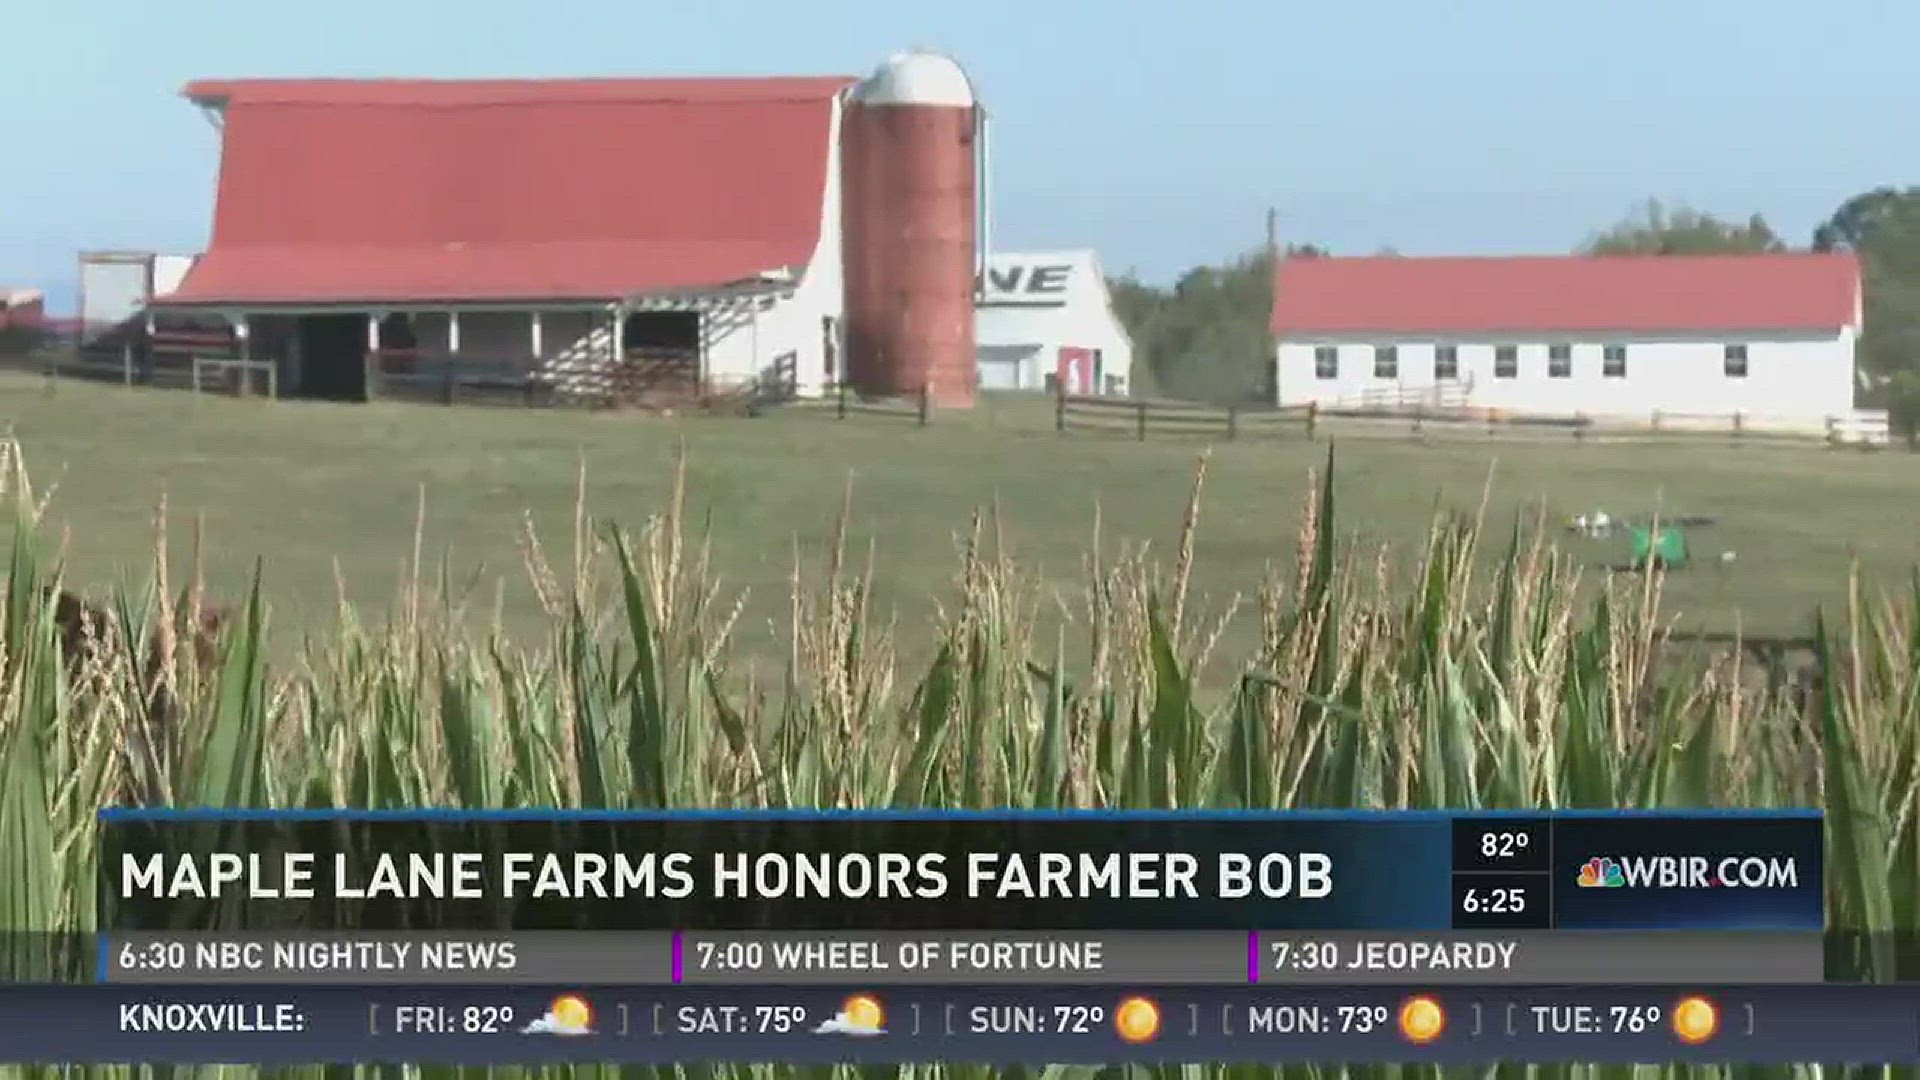 Oct. 6, 2016: After the death of "Farmer Bob," Maple Lane Farms is using its corn maze to pay tribute to him this year.